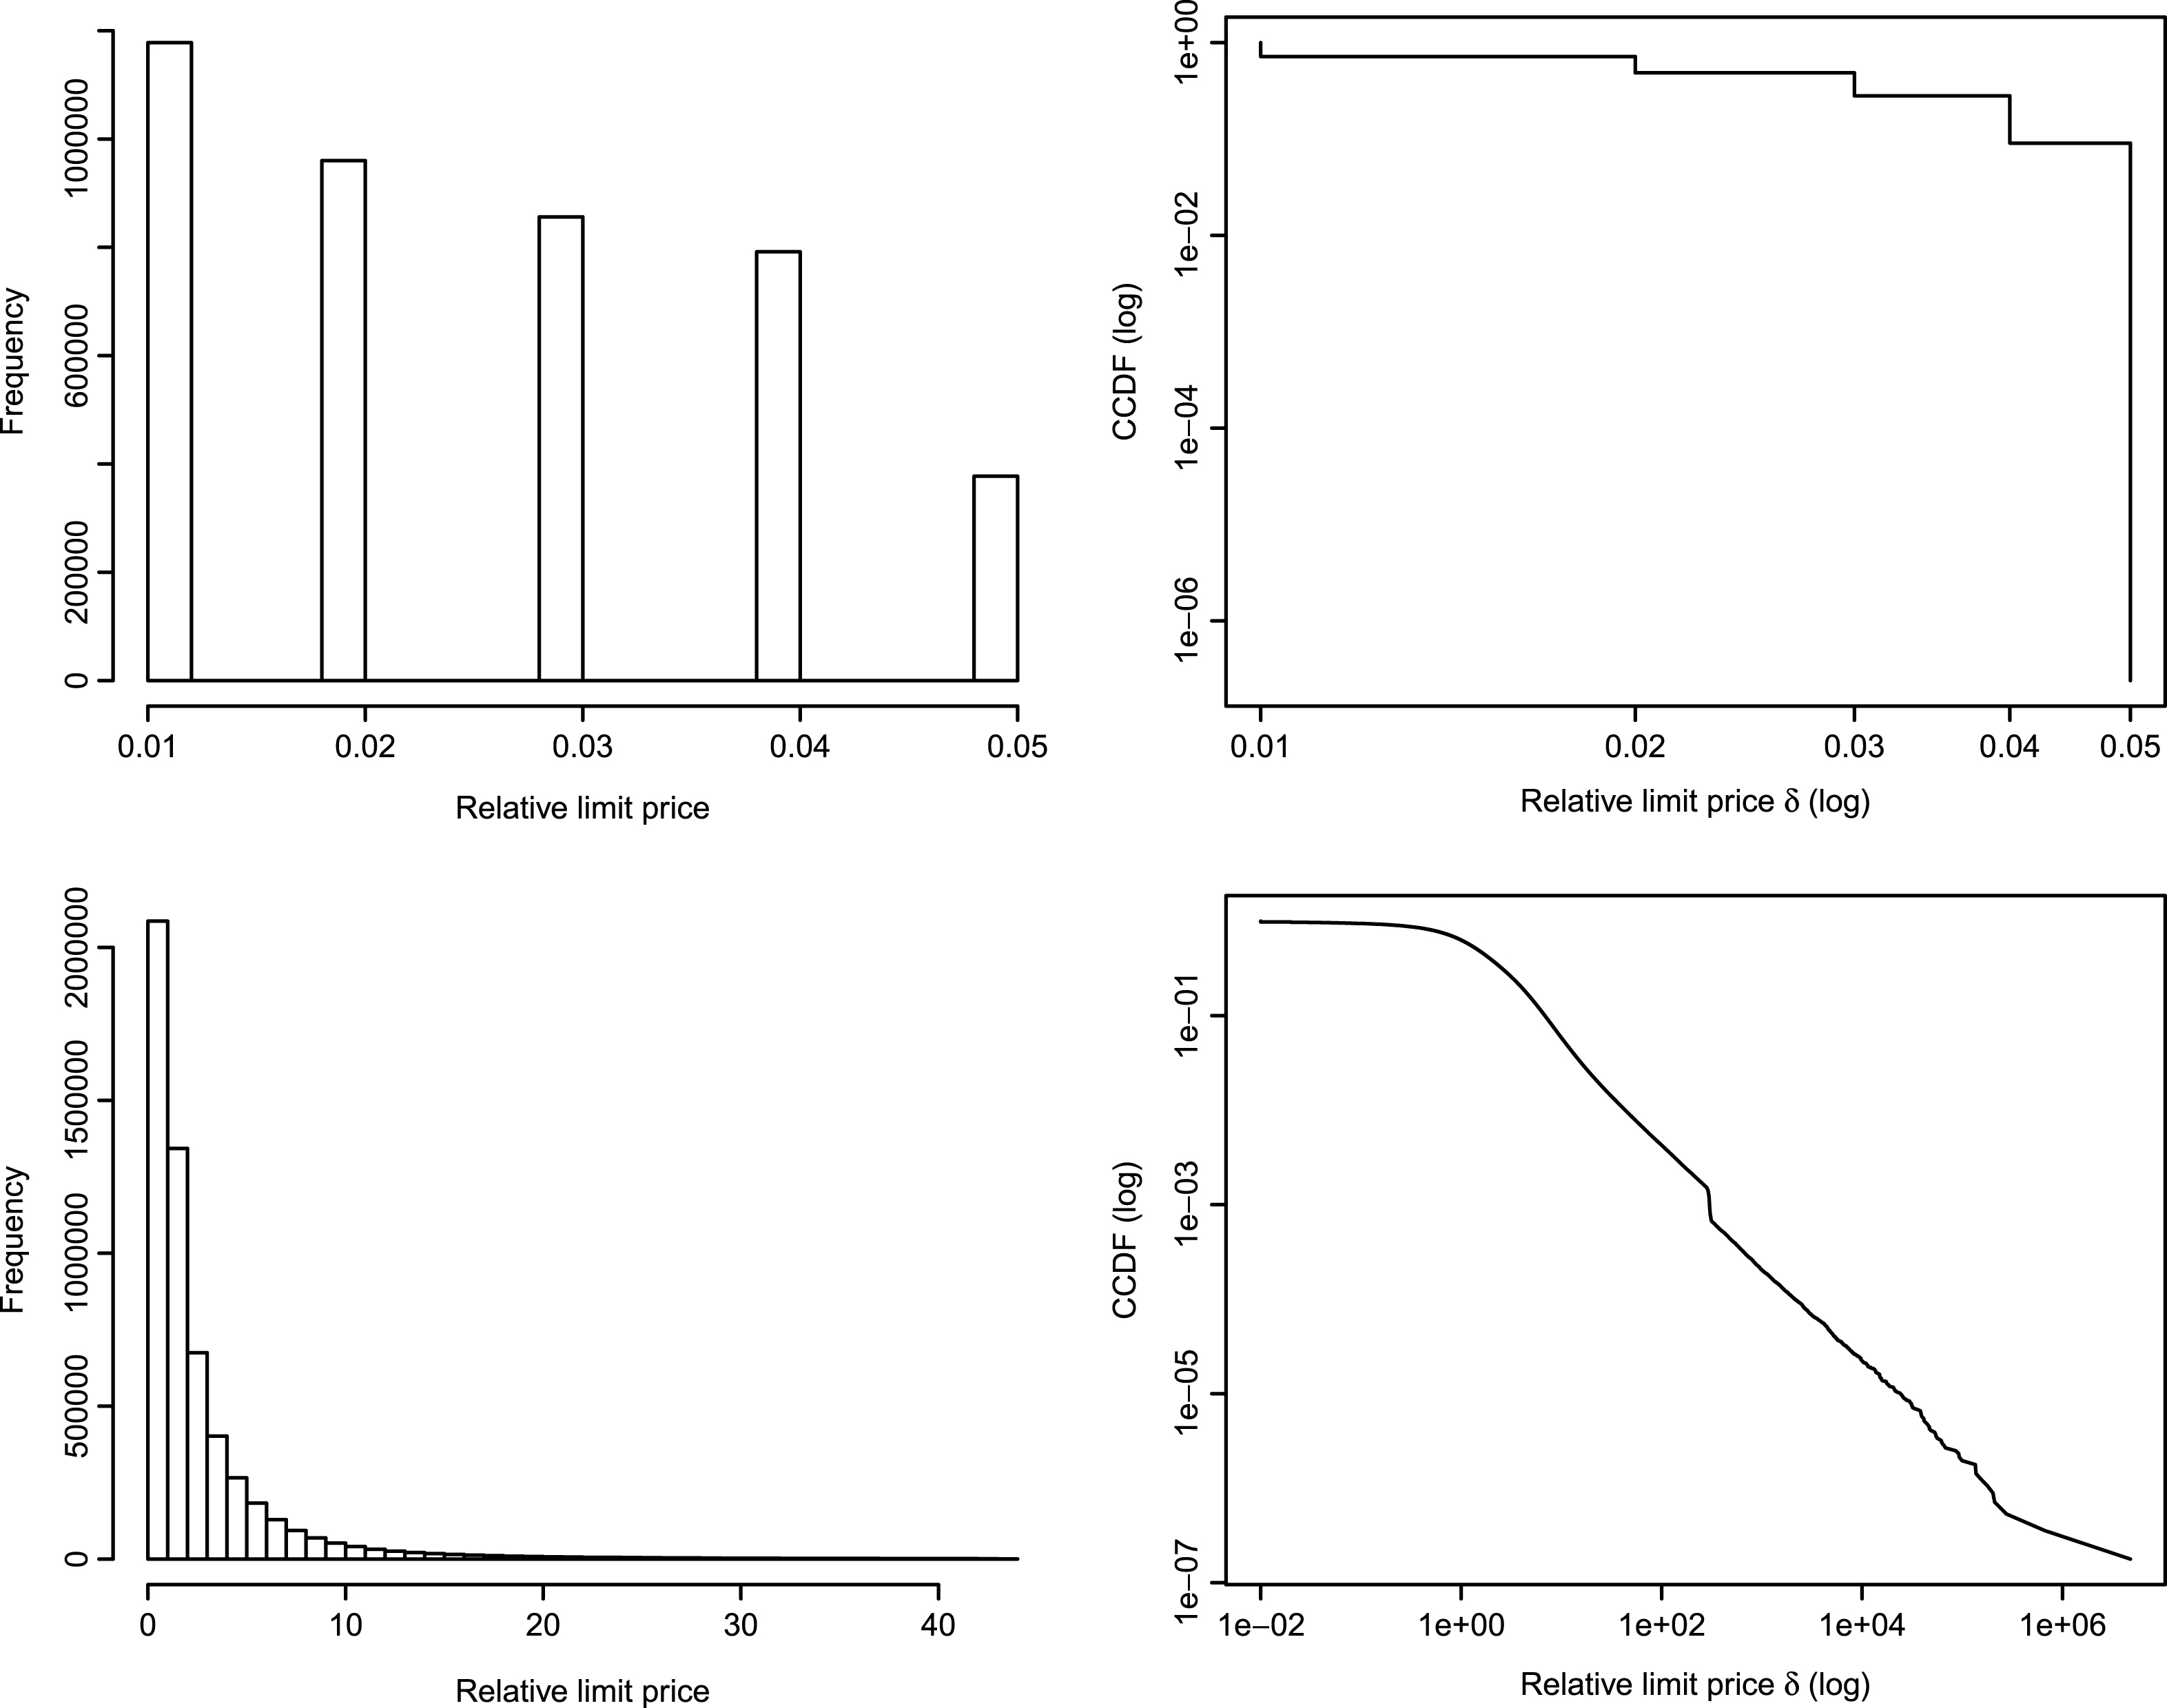 Relative limit price distribution of the off-spread limit orders. The relative limit price distributions of the off-spread limit orders are represented as histograms (left panels) and Zipf’s plot (right panels), both for the CB model (top panels) and Micro model (bottom panels). The bottom-left histogram (CB model) is framed up to the 99th percentile on the x-axis.